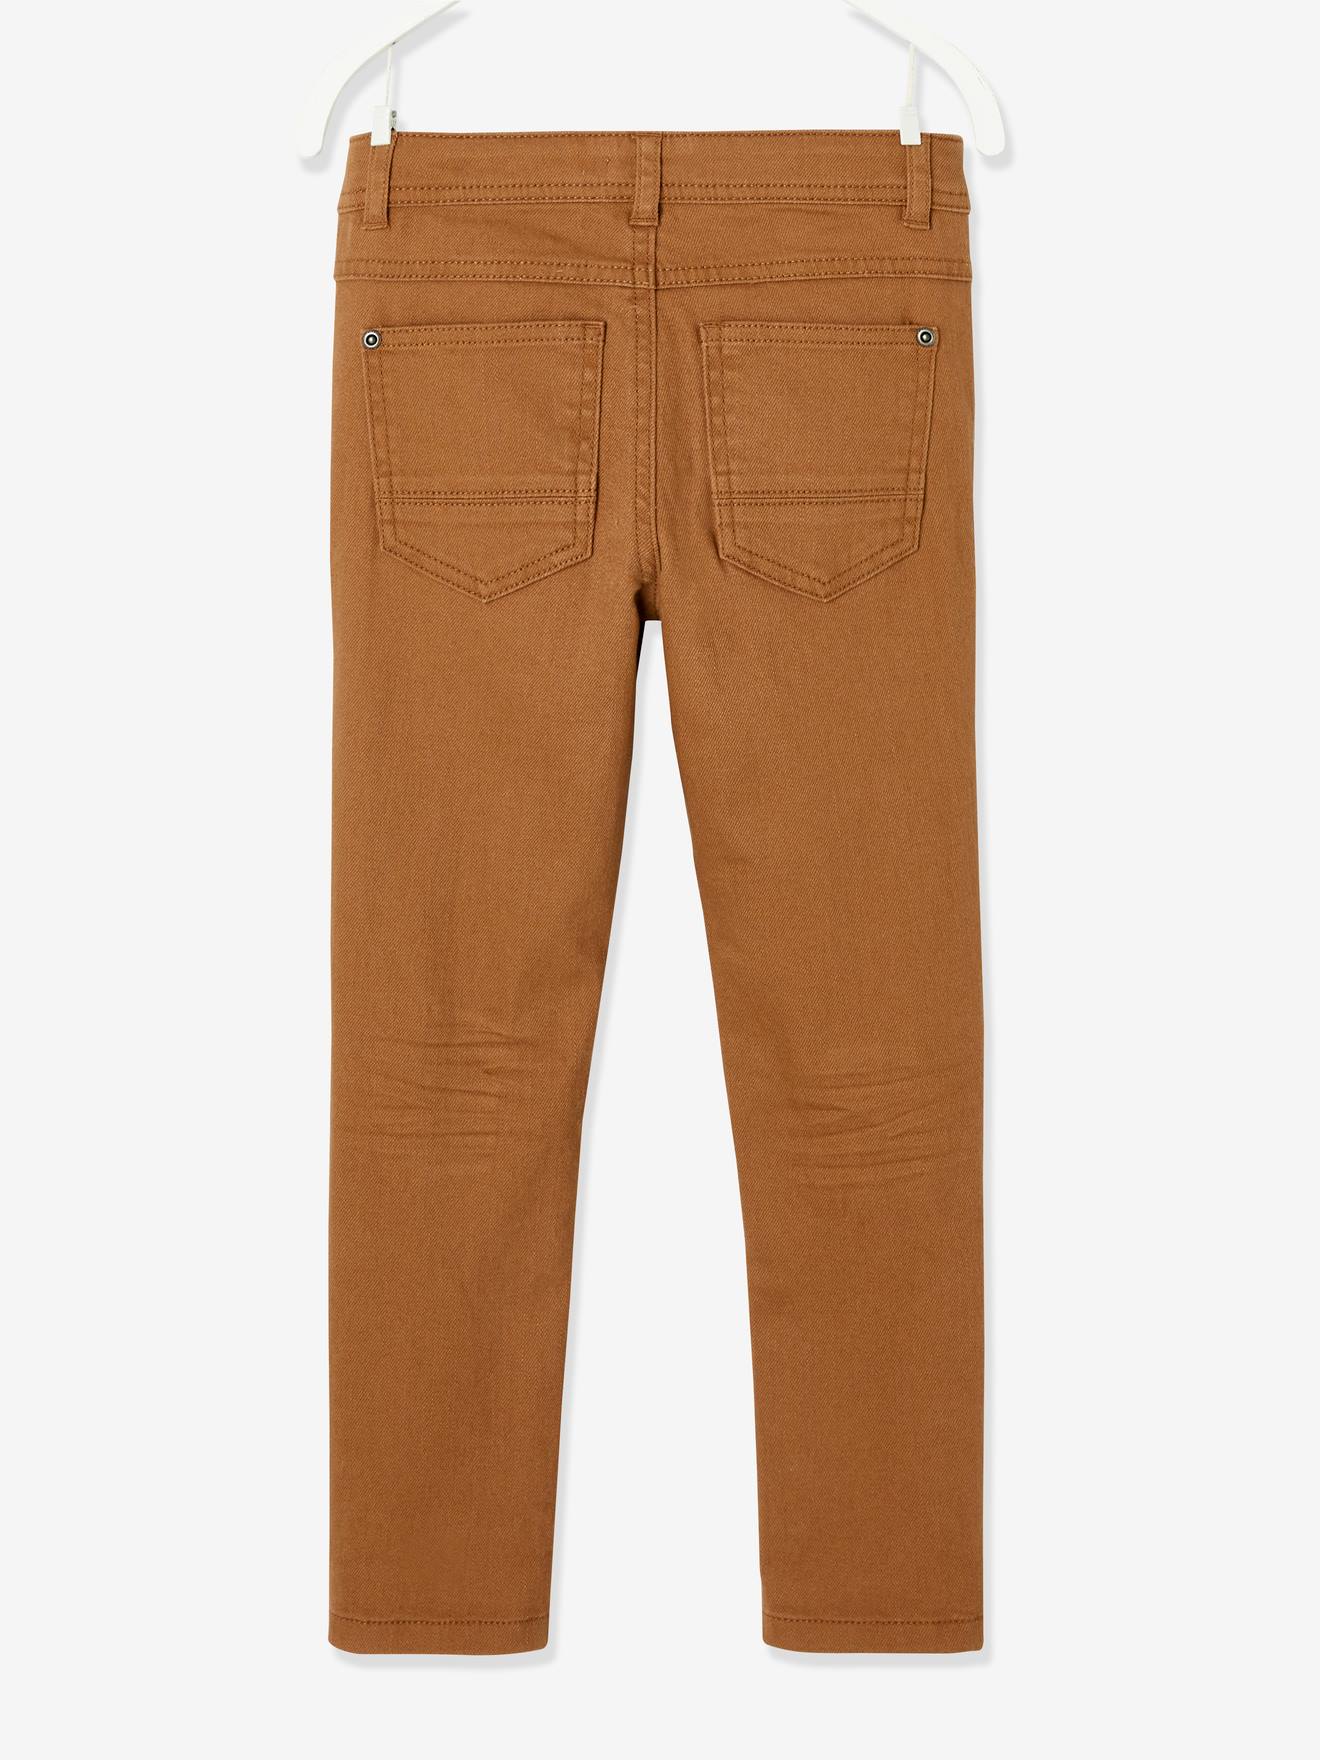 Relaxed Fit Twill Pants - Brown - Kids | H&M US